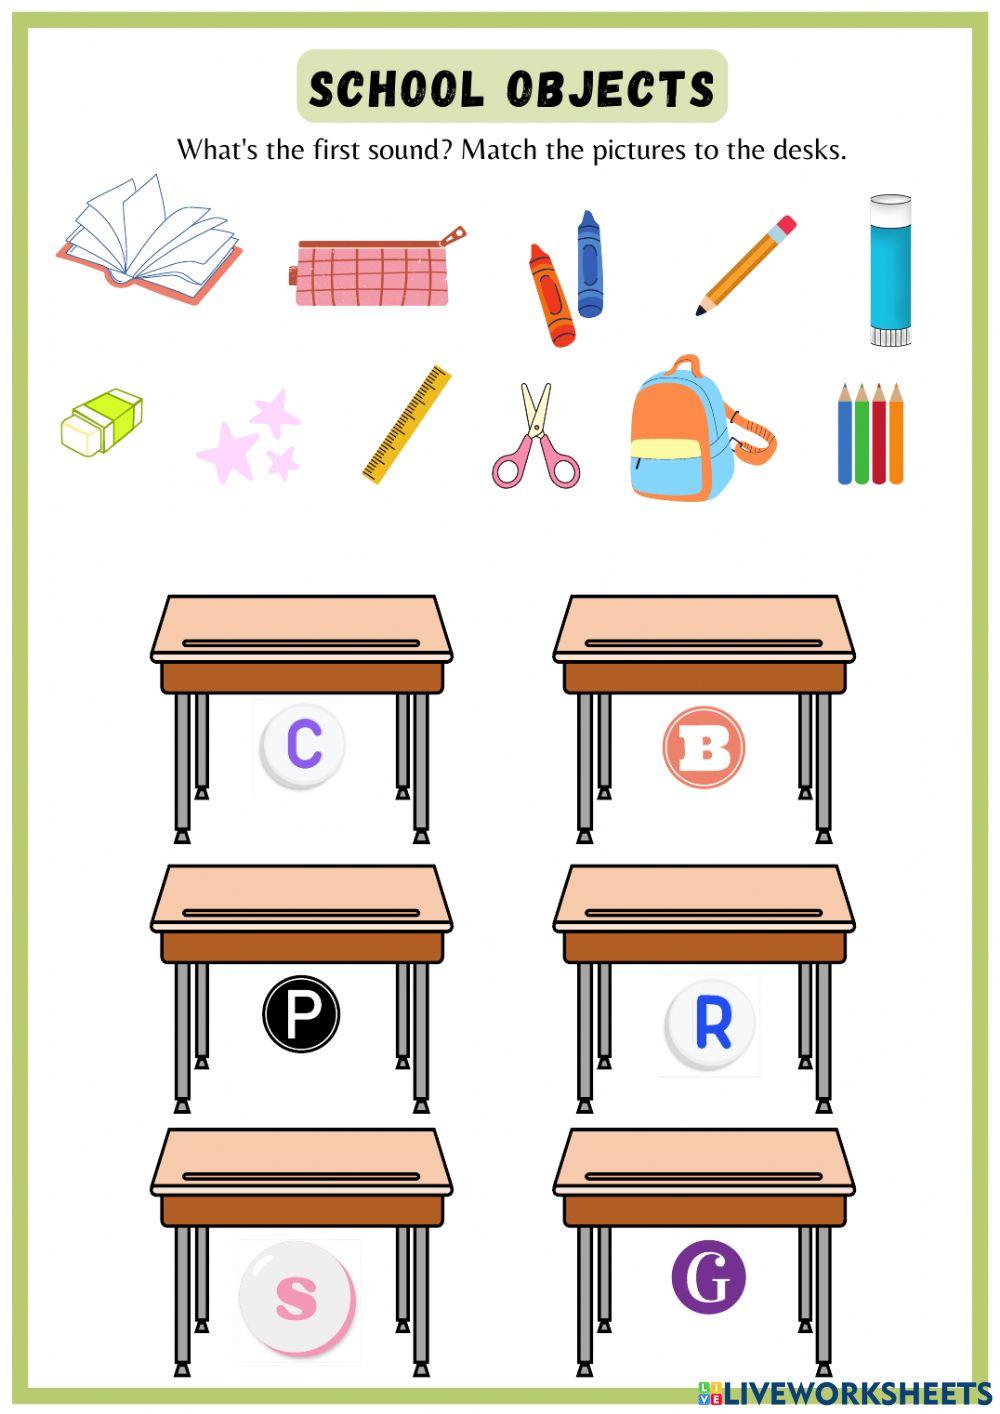 School objects online exercise for beginners